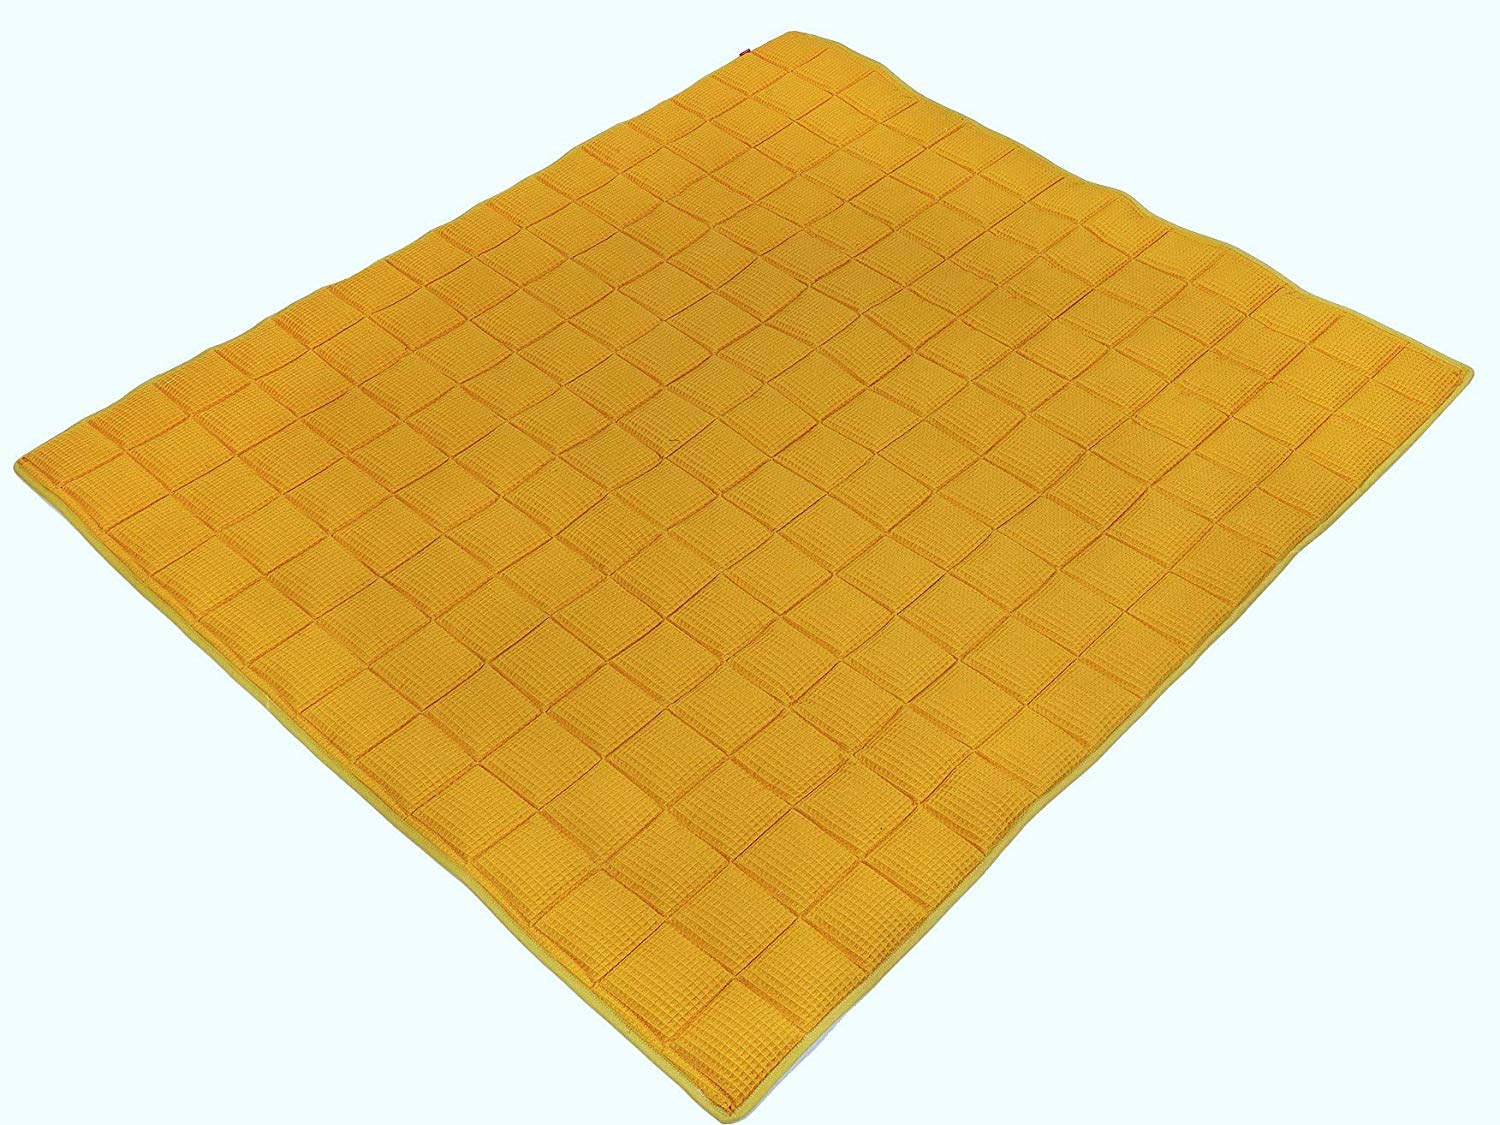 Ideenreich Ideenreich 2537 Baby Crawling Blanket for Crawling Dream Wafer Look Mustard 130 x 150 cm Ideal as a Play Mat and Playpen Insert Yellow